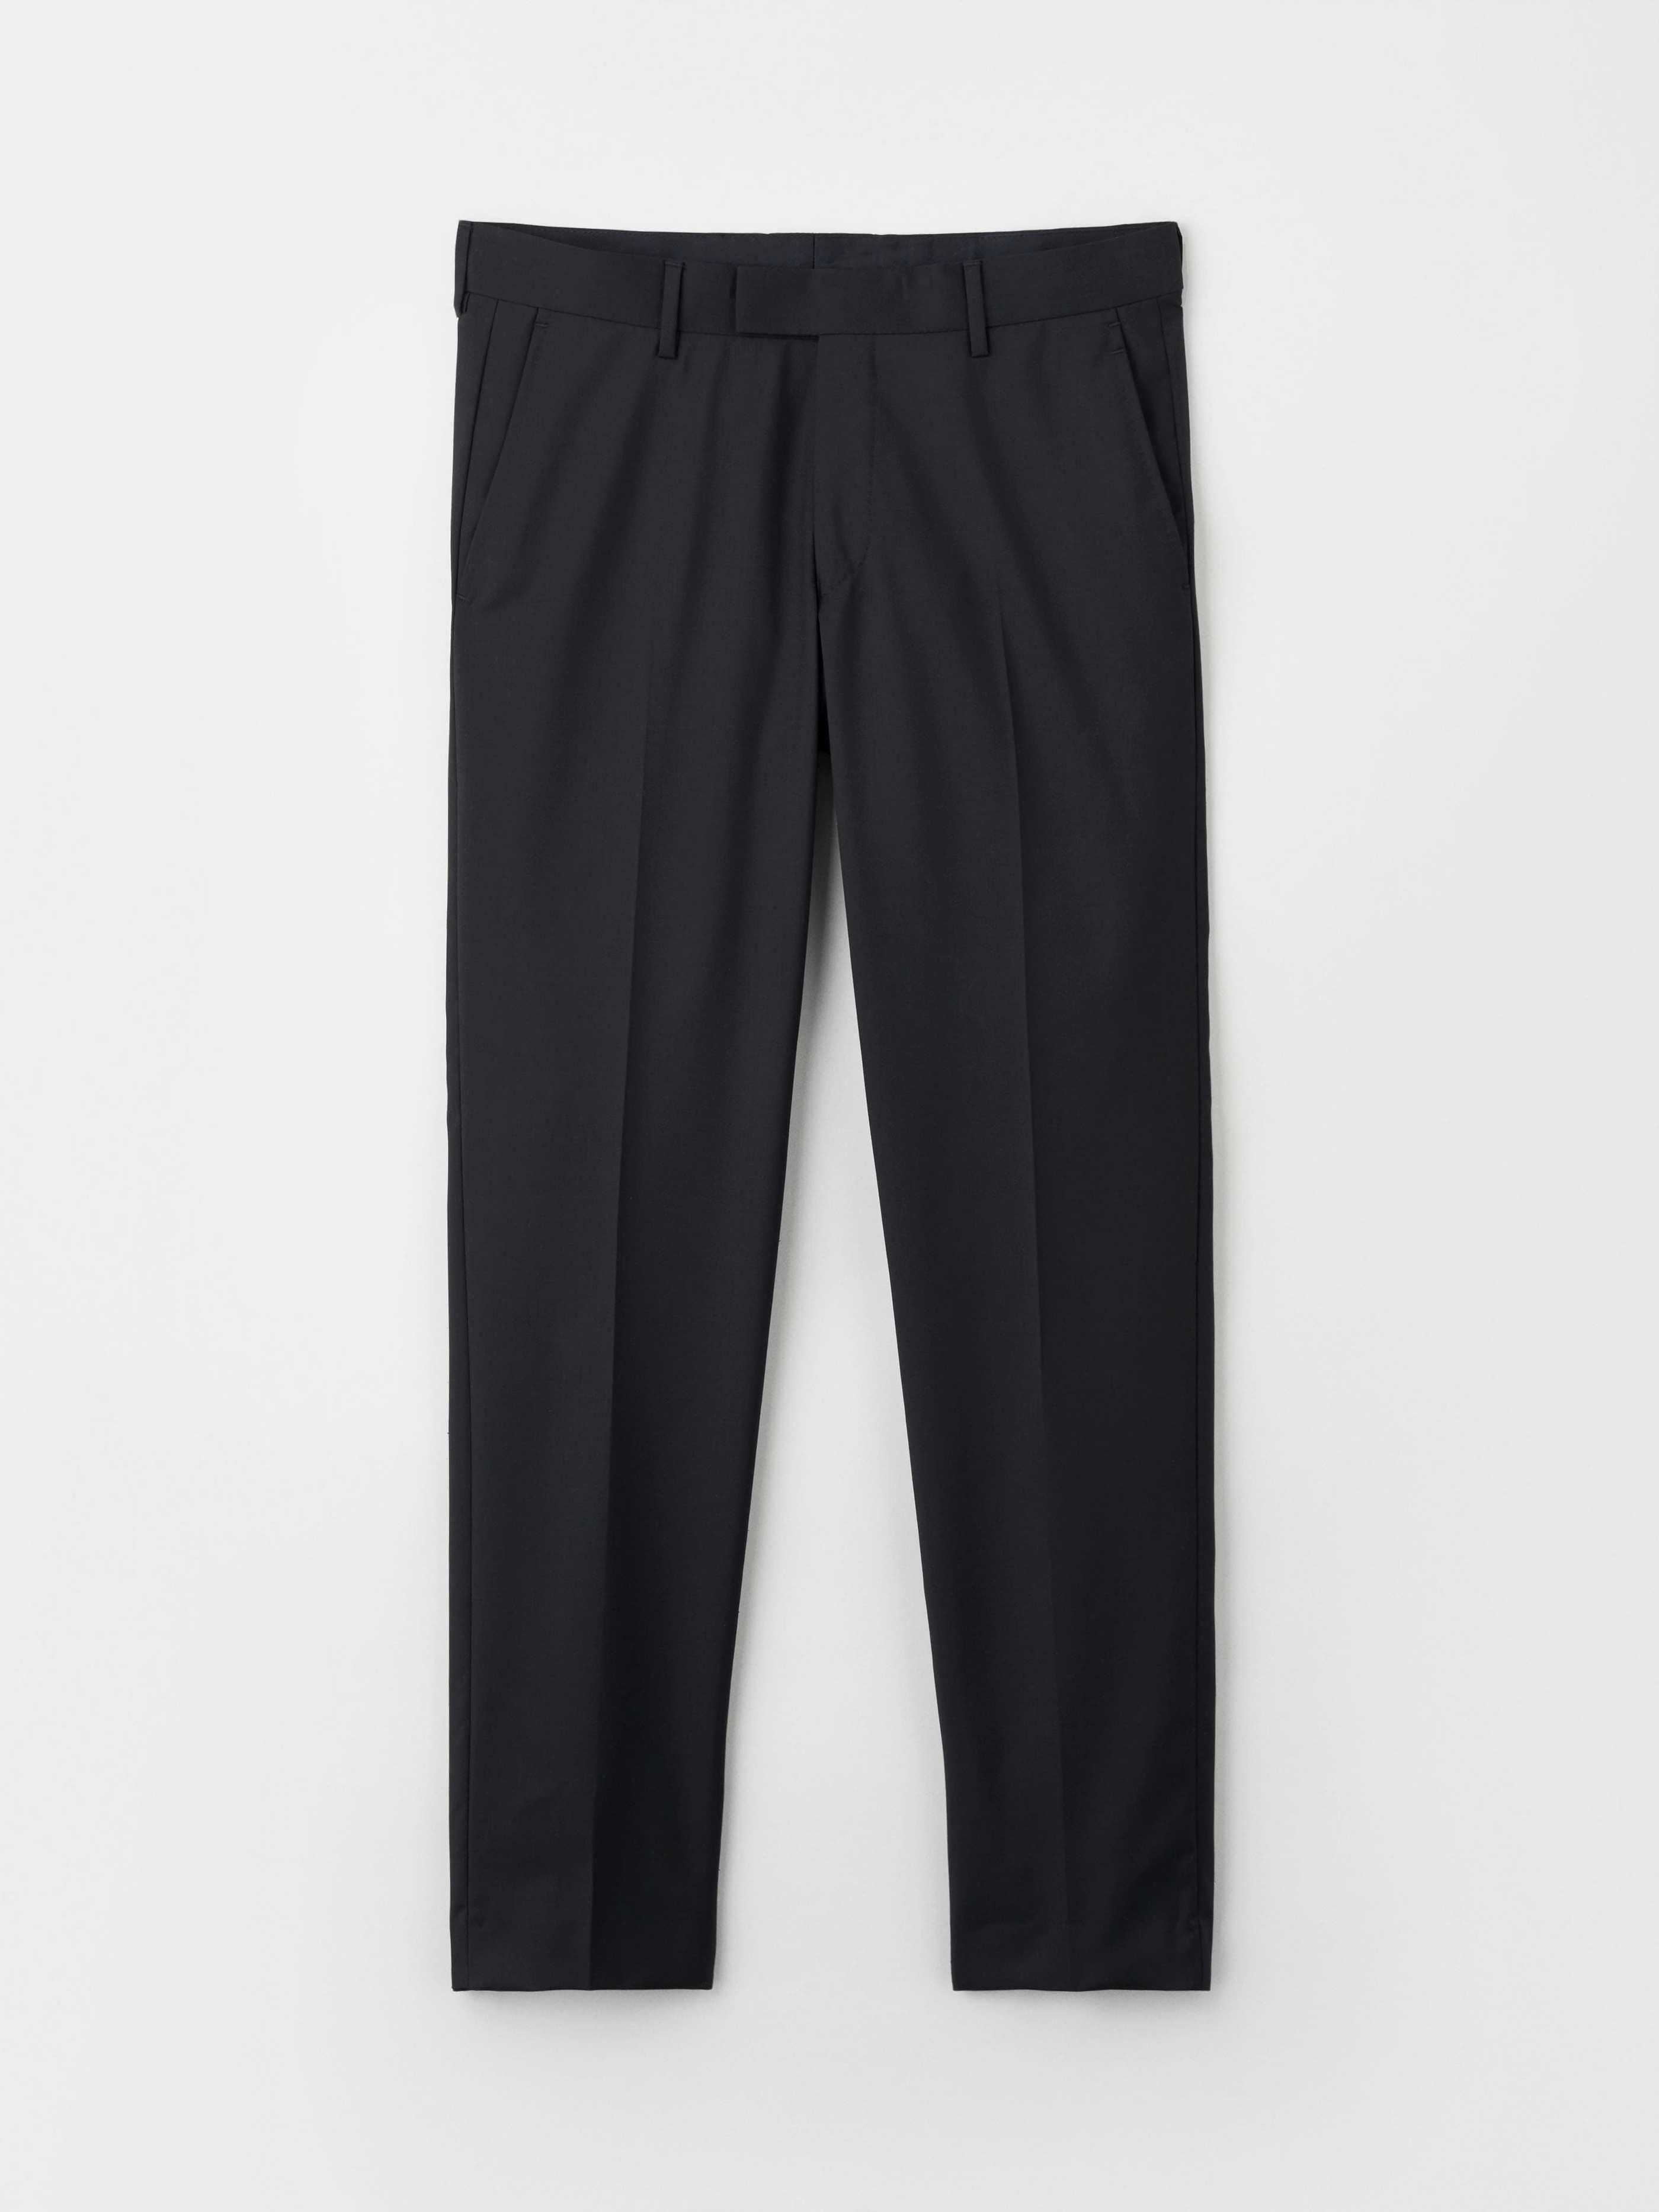 TIGER OF SWEDEN Tenutas Trousers in Black T70698004Z 44 050-BLACK FROM EIGHTYWINGOLD - OFFICIAL BRAND PARTNER